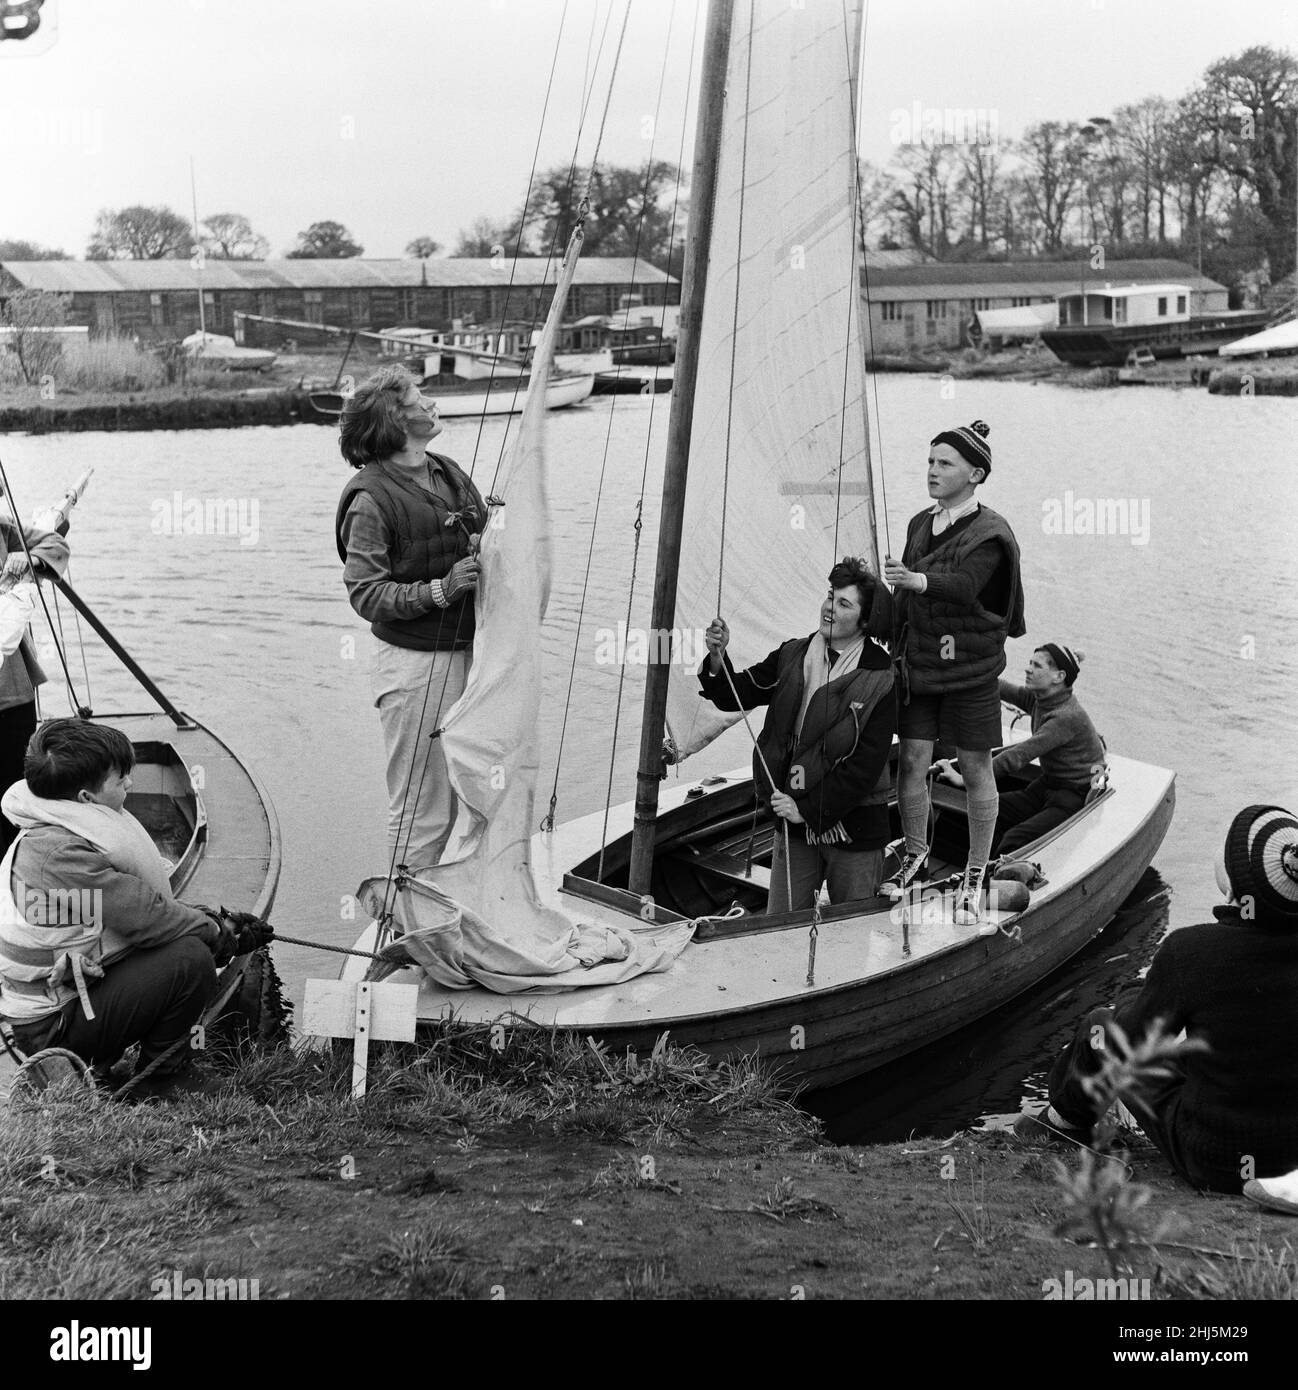 Pupils of Clarendon Secondary Modern School, South Oxhey, Watford, Hertfordshire, taking a course in yachting and seamanship on the Norfolk Broads during school holidays. The children aged from 12 upwards, spend a week under canvas and are able to spend the days receiving instructions on sailing vessels of various sizes. They are under the instruction of 28 year old Crafts master Allen Standley and 21 year old Maths and English teacher Yvonne Chapman. 28th April 1957. Stock Photo